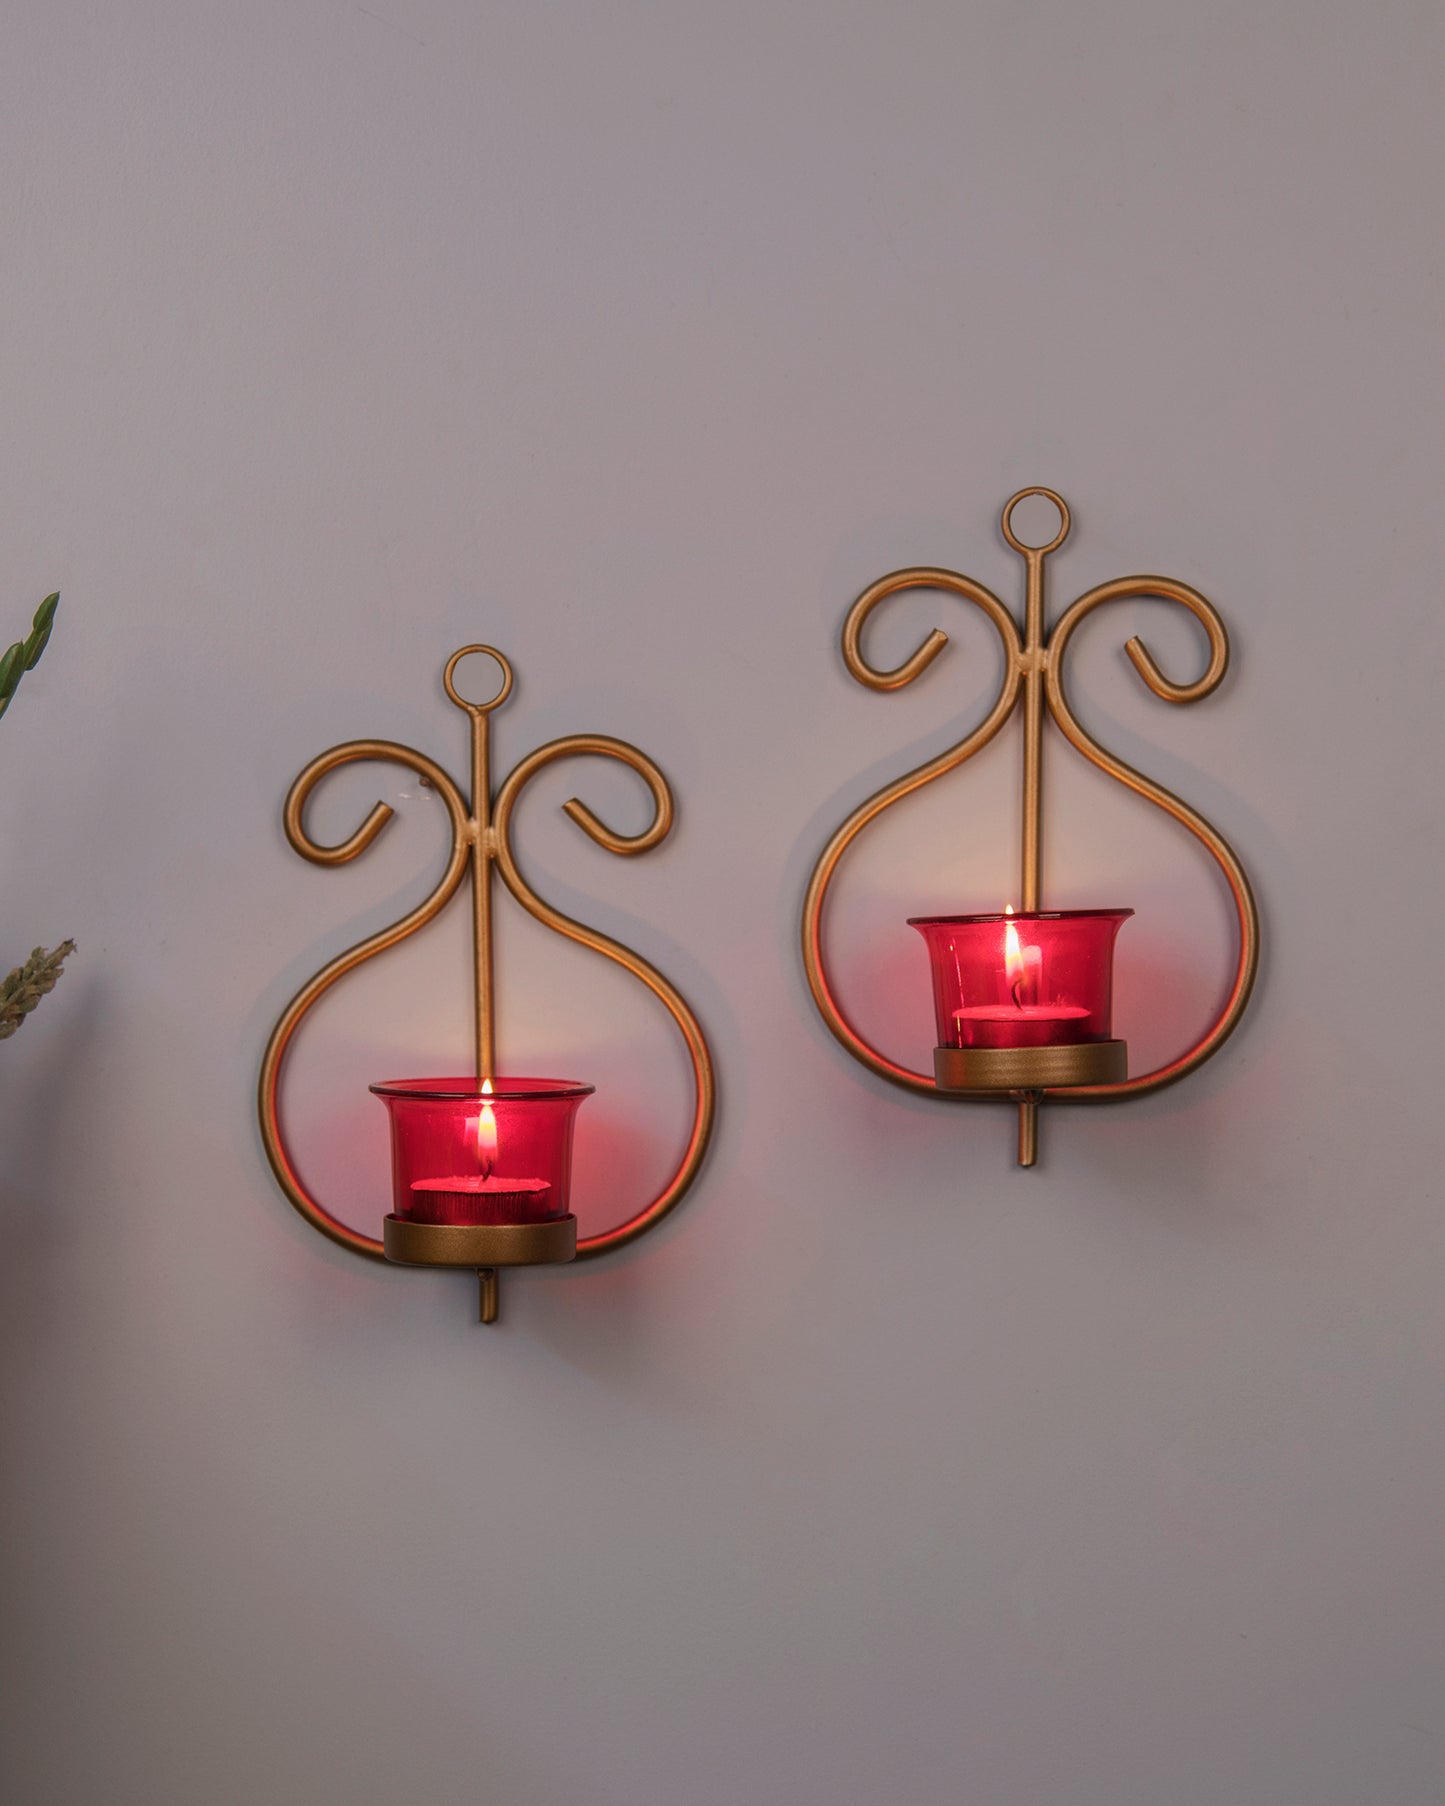 Set of 2 Decorative Golden Wall Sconce/Candle Holder With Glass and Free T-light Candles